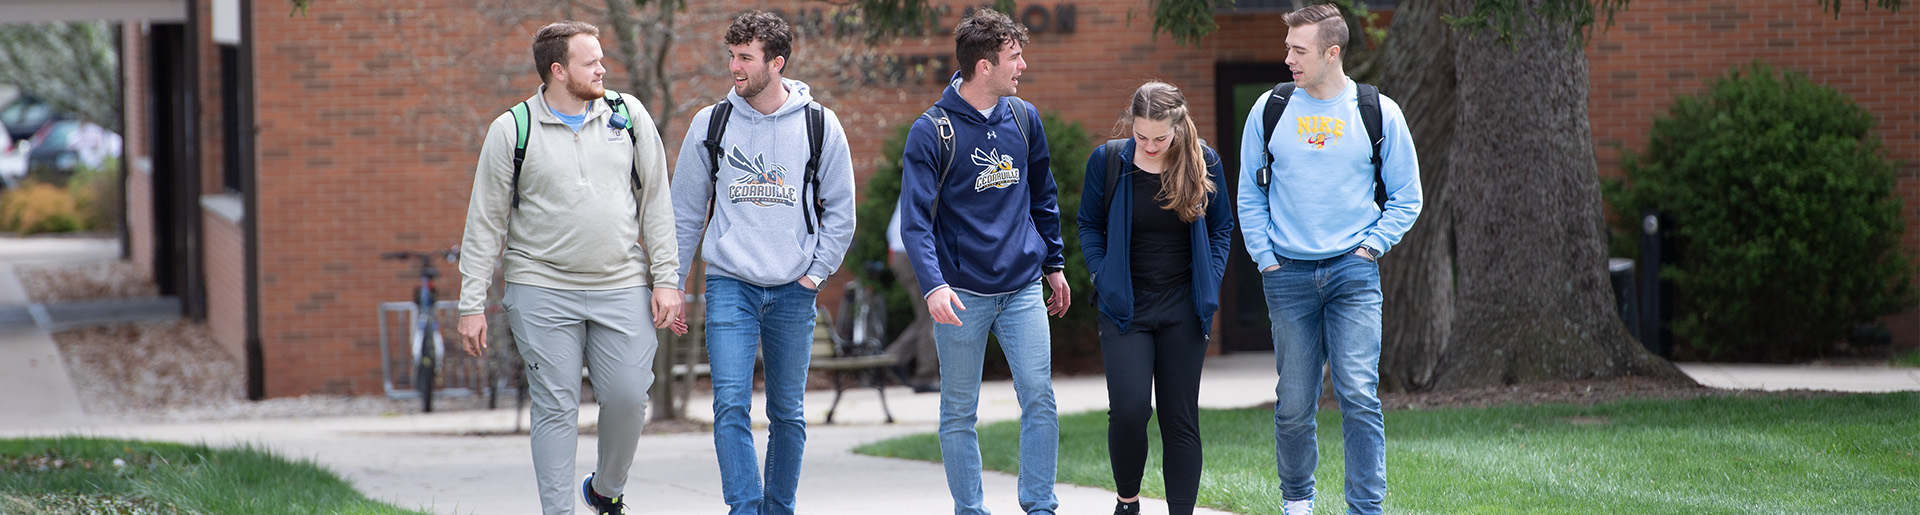 College students, four males and one female, talking together as they walk to class.